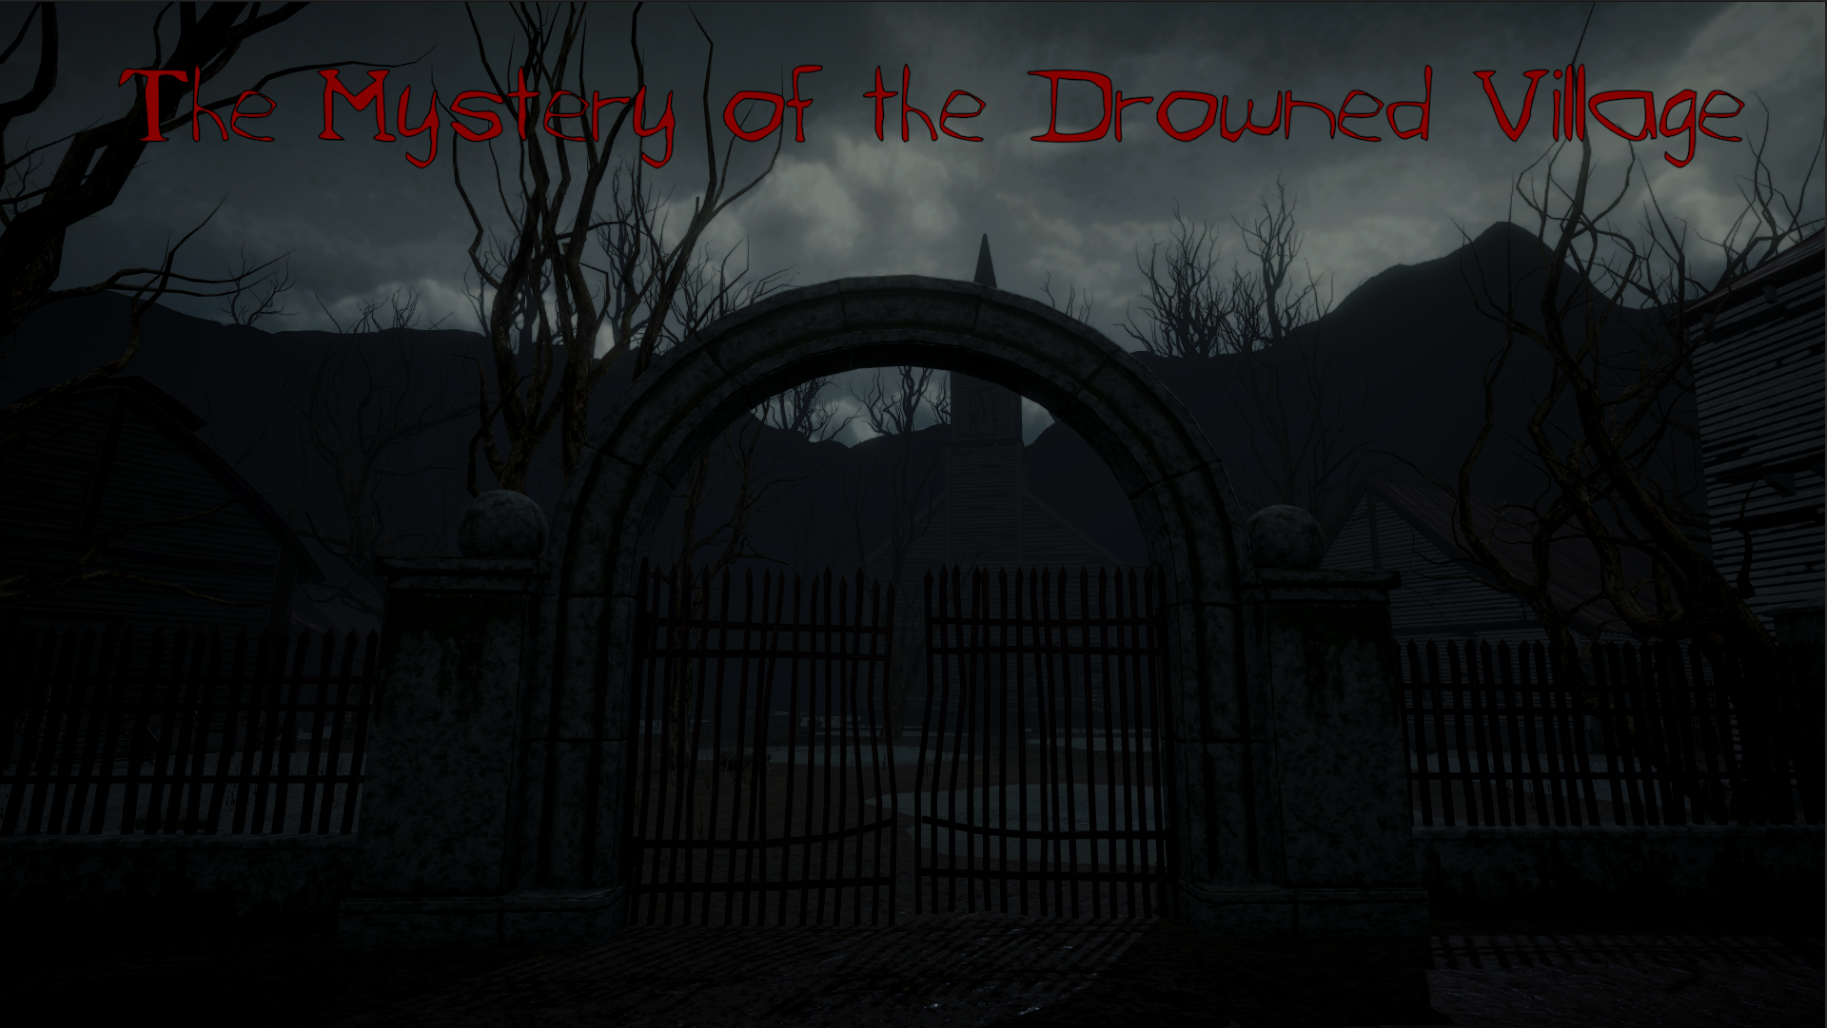 The Mystery of the Drowned Village